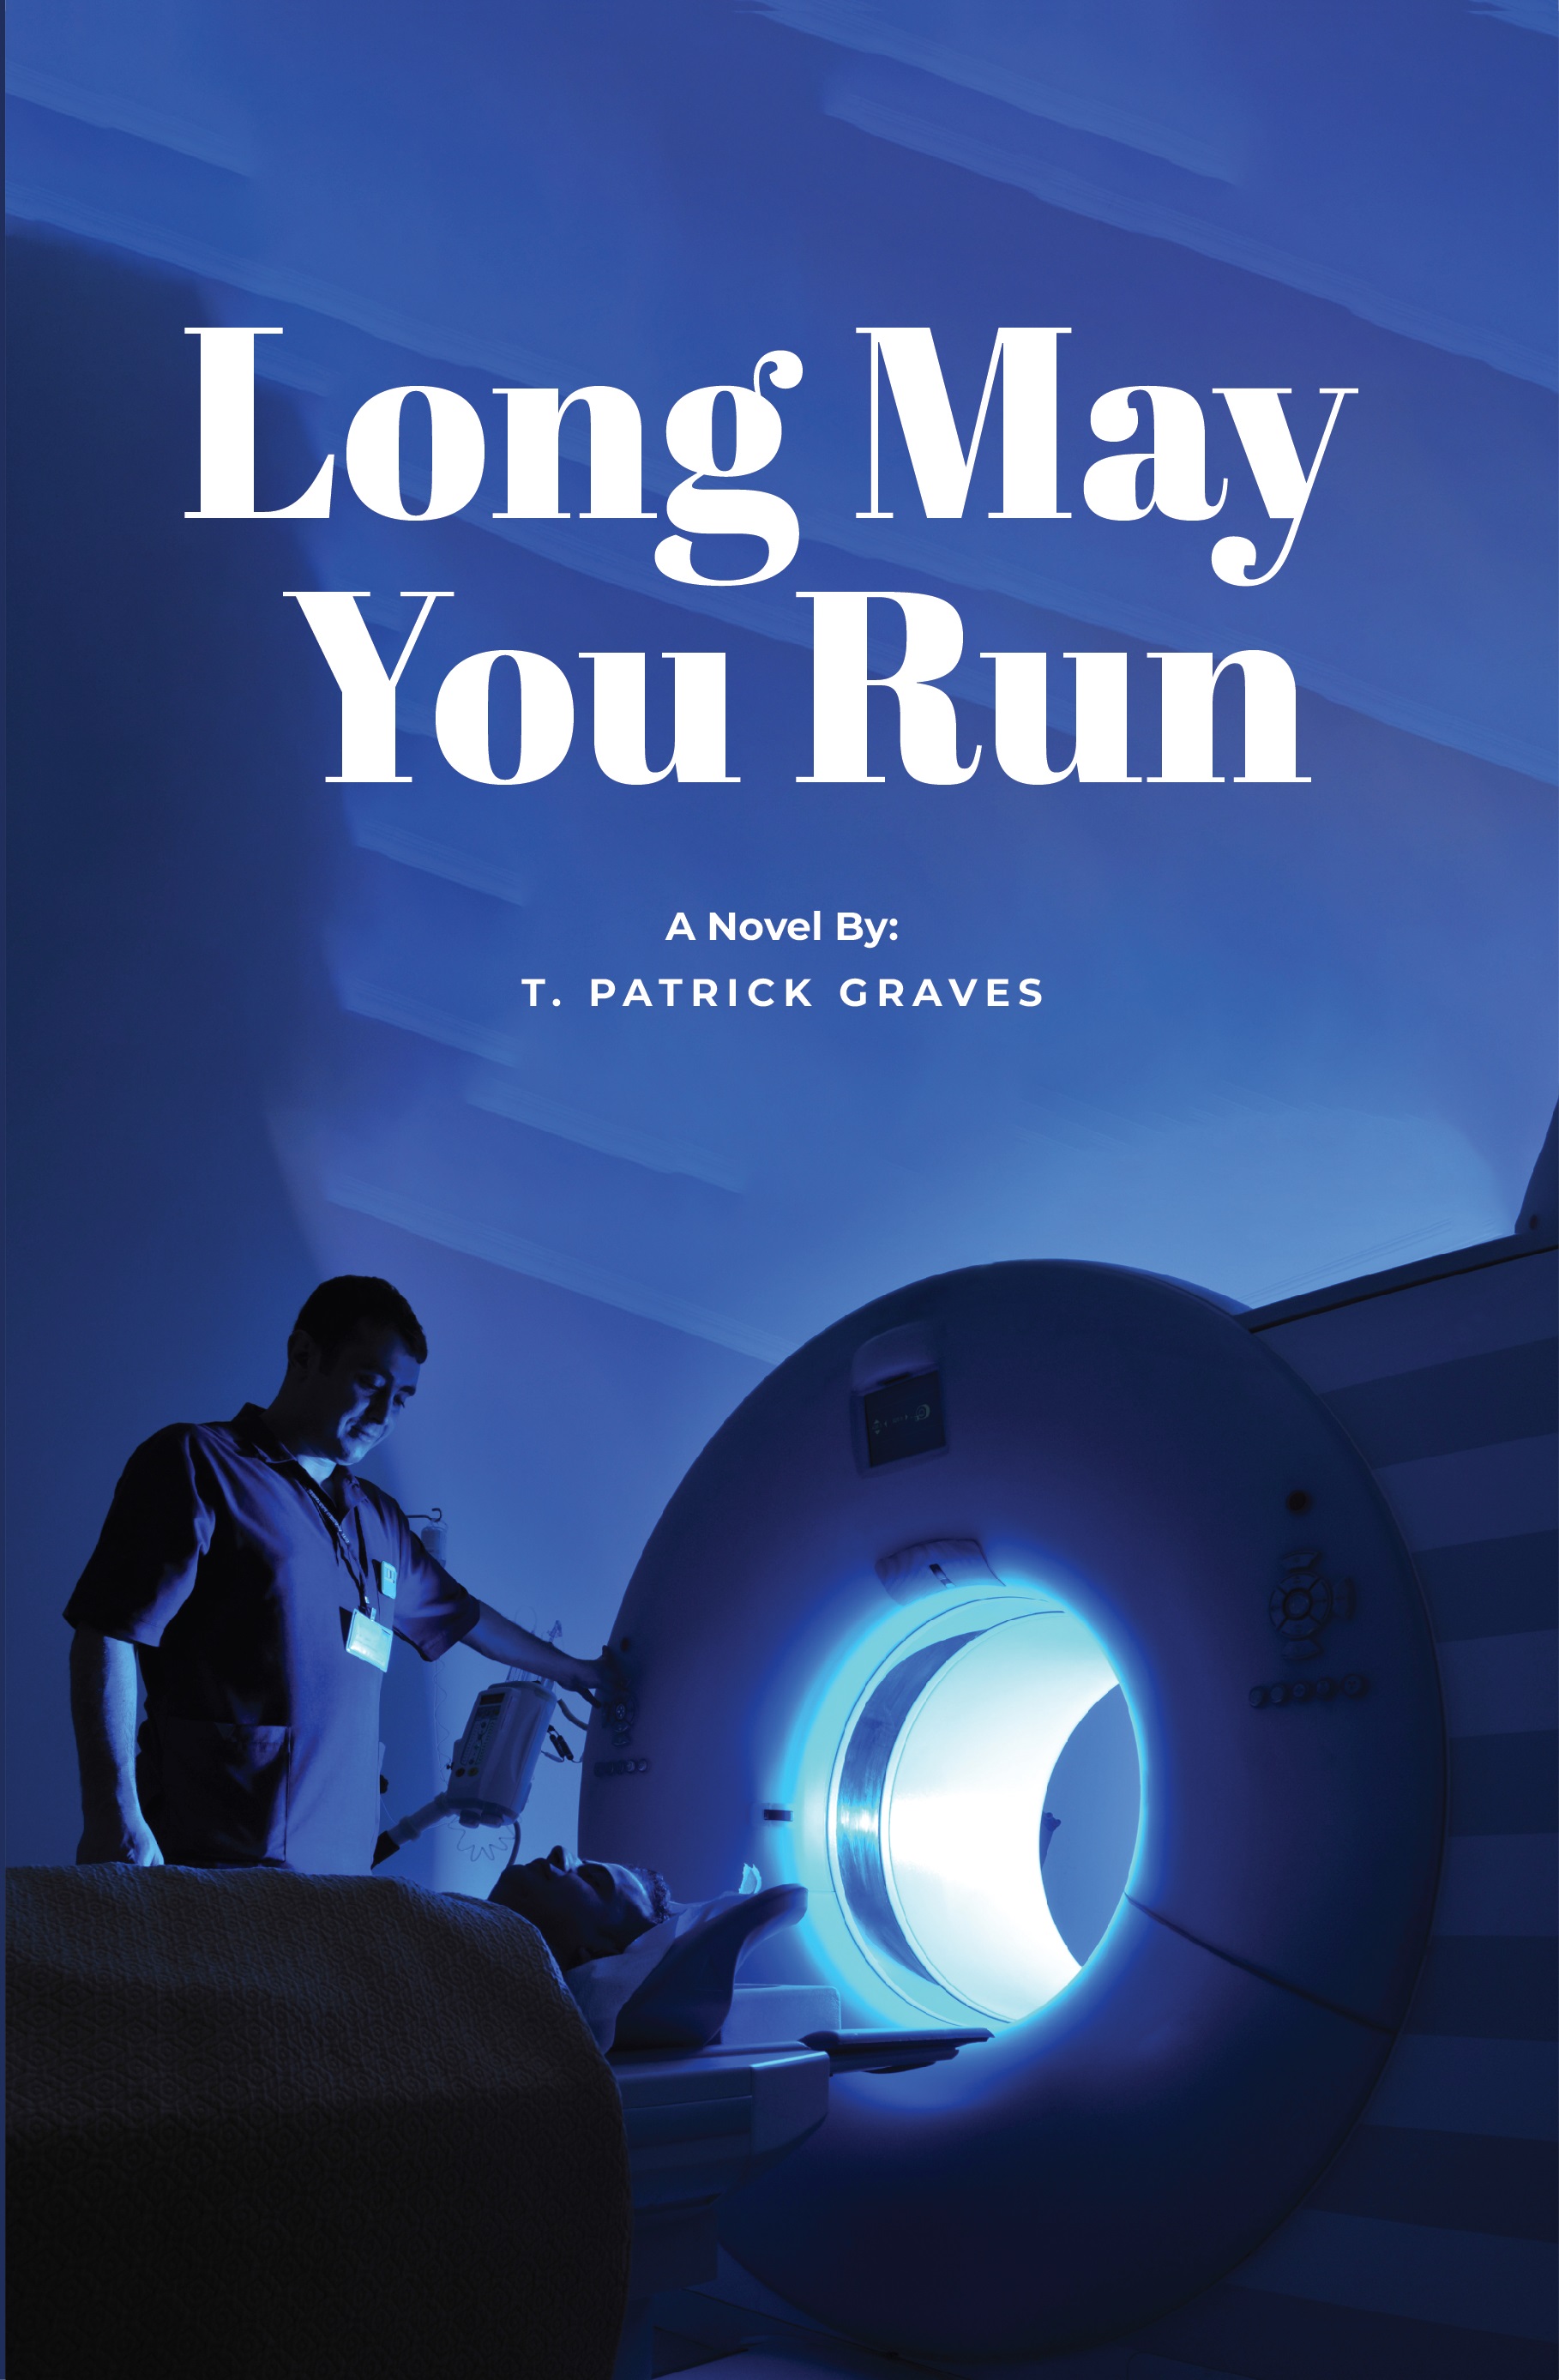 Love, Loss, and Hope - Themes Explored in Long May You Run